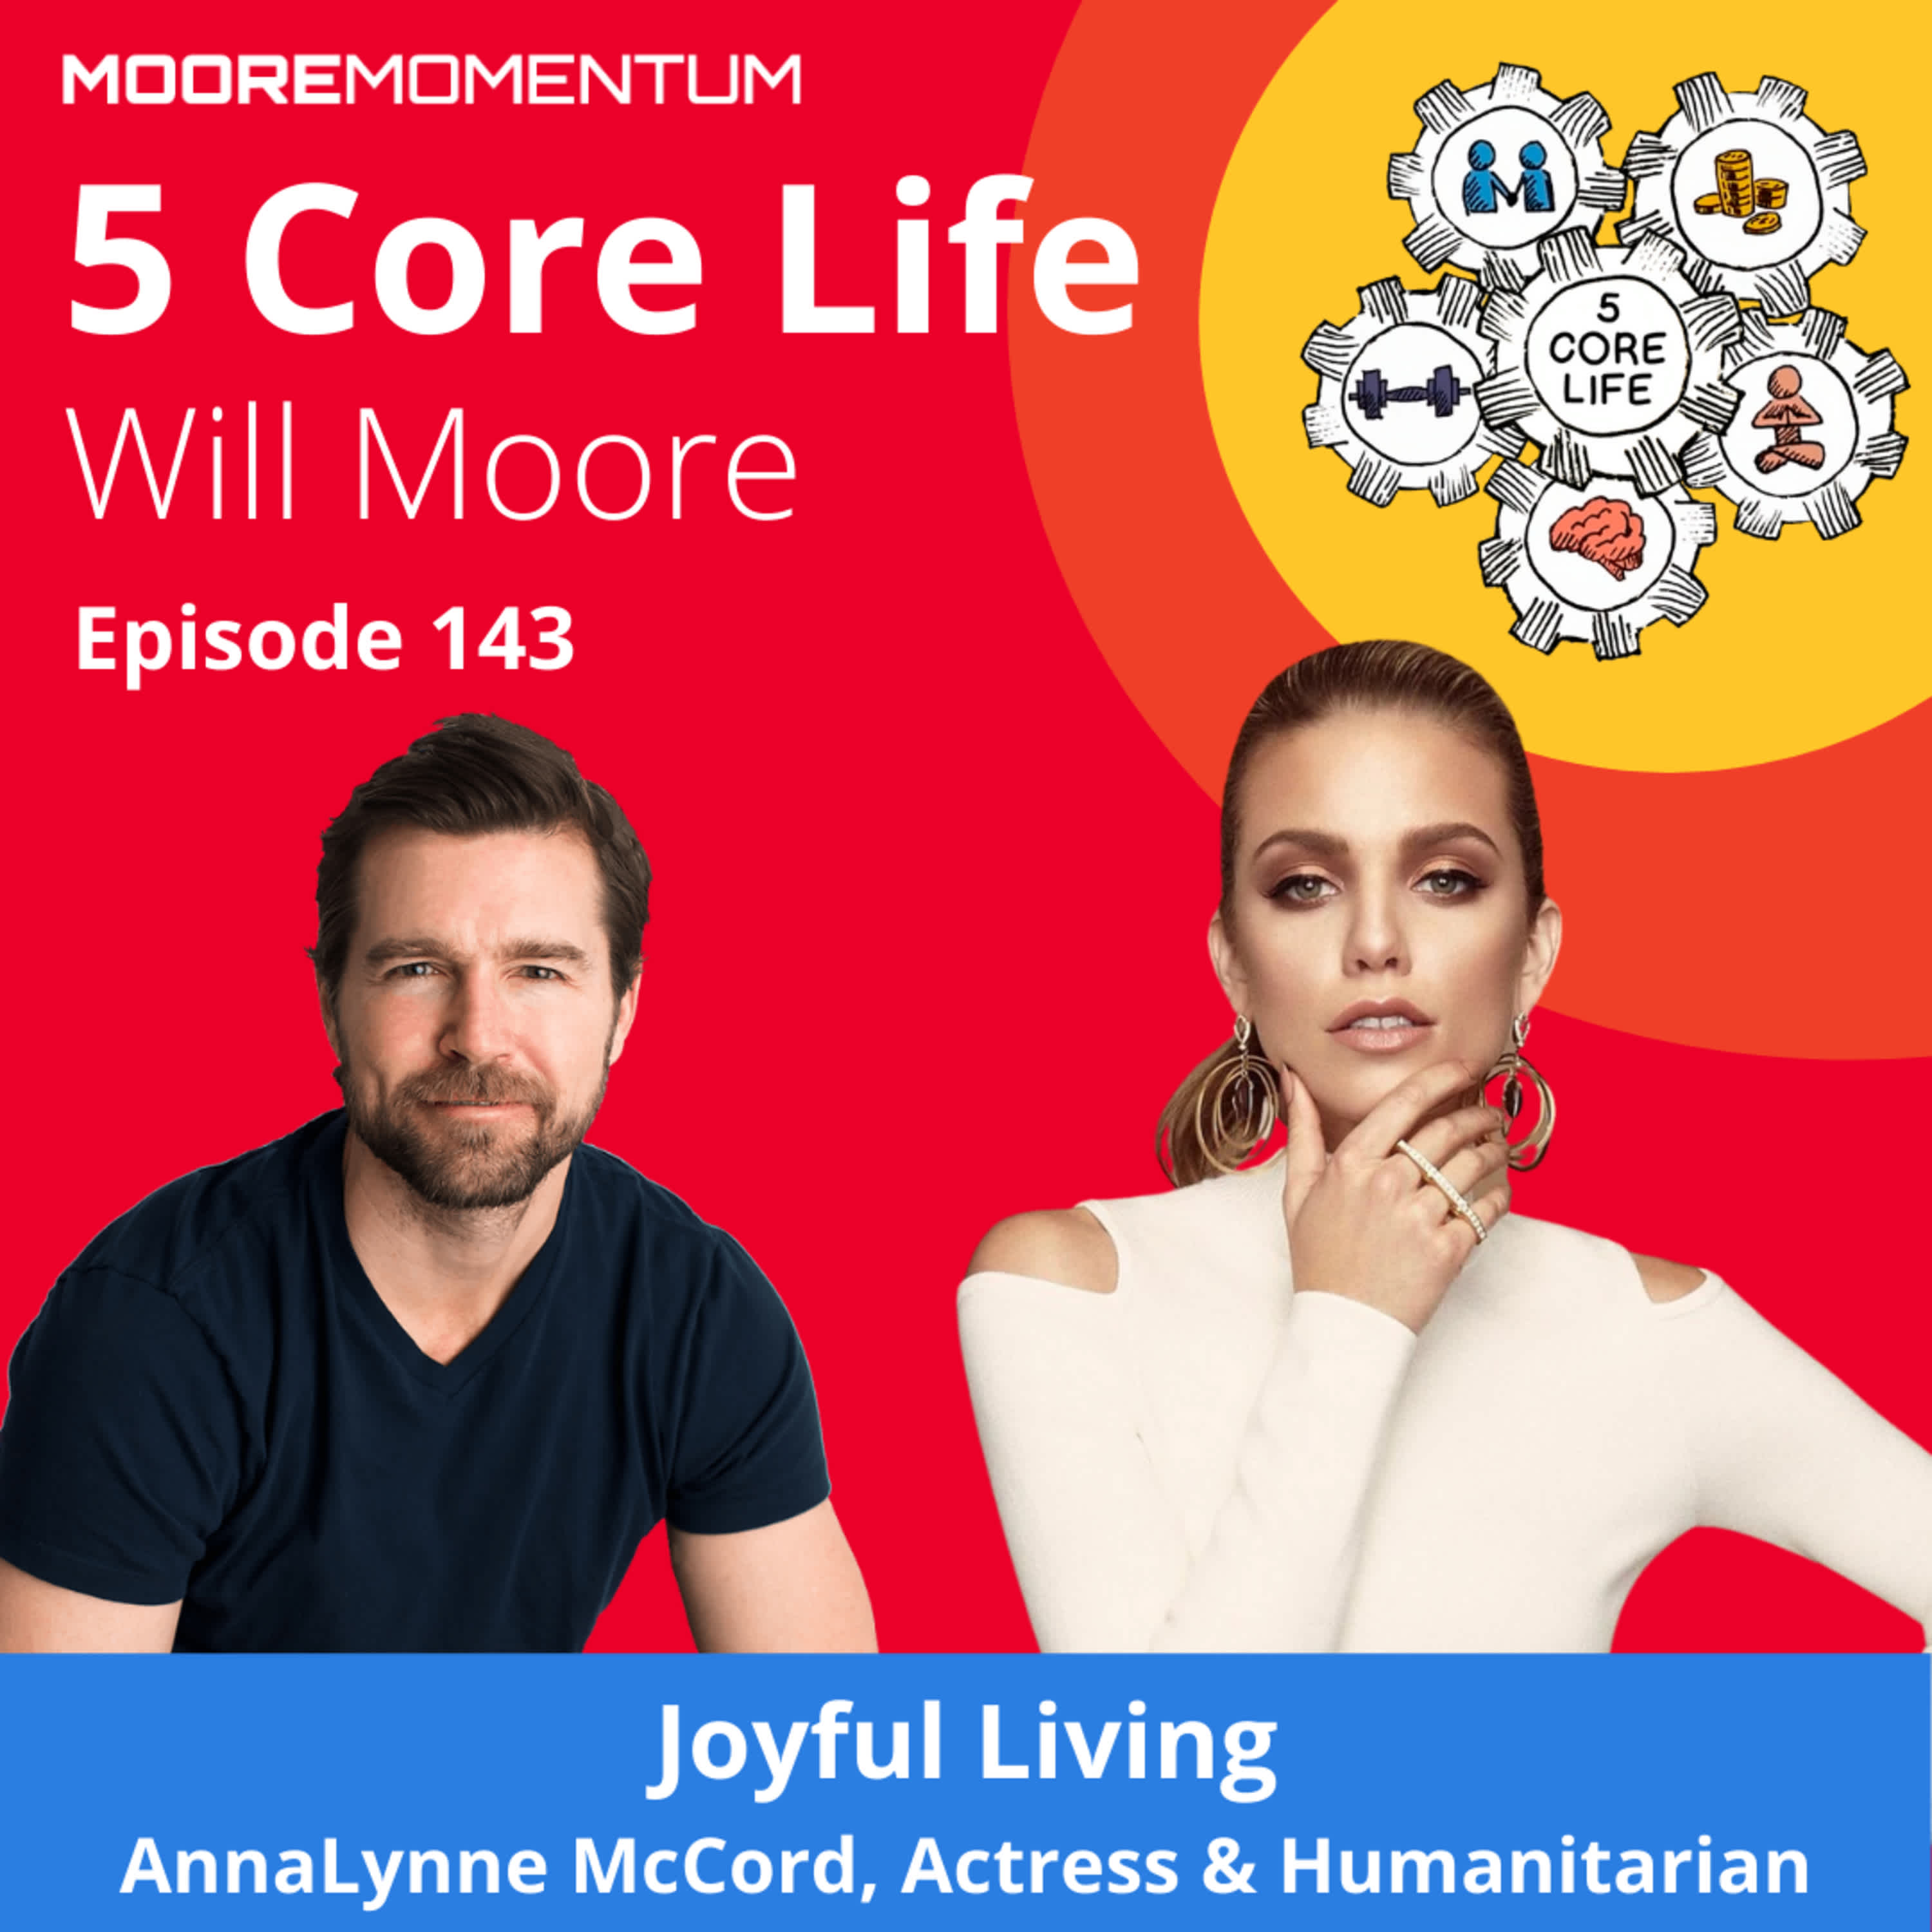 Life Altering Moments, Gamifying Your Life for Joyful Living | Annalynne McCord, Actress & Human Trafficking Activist